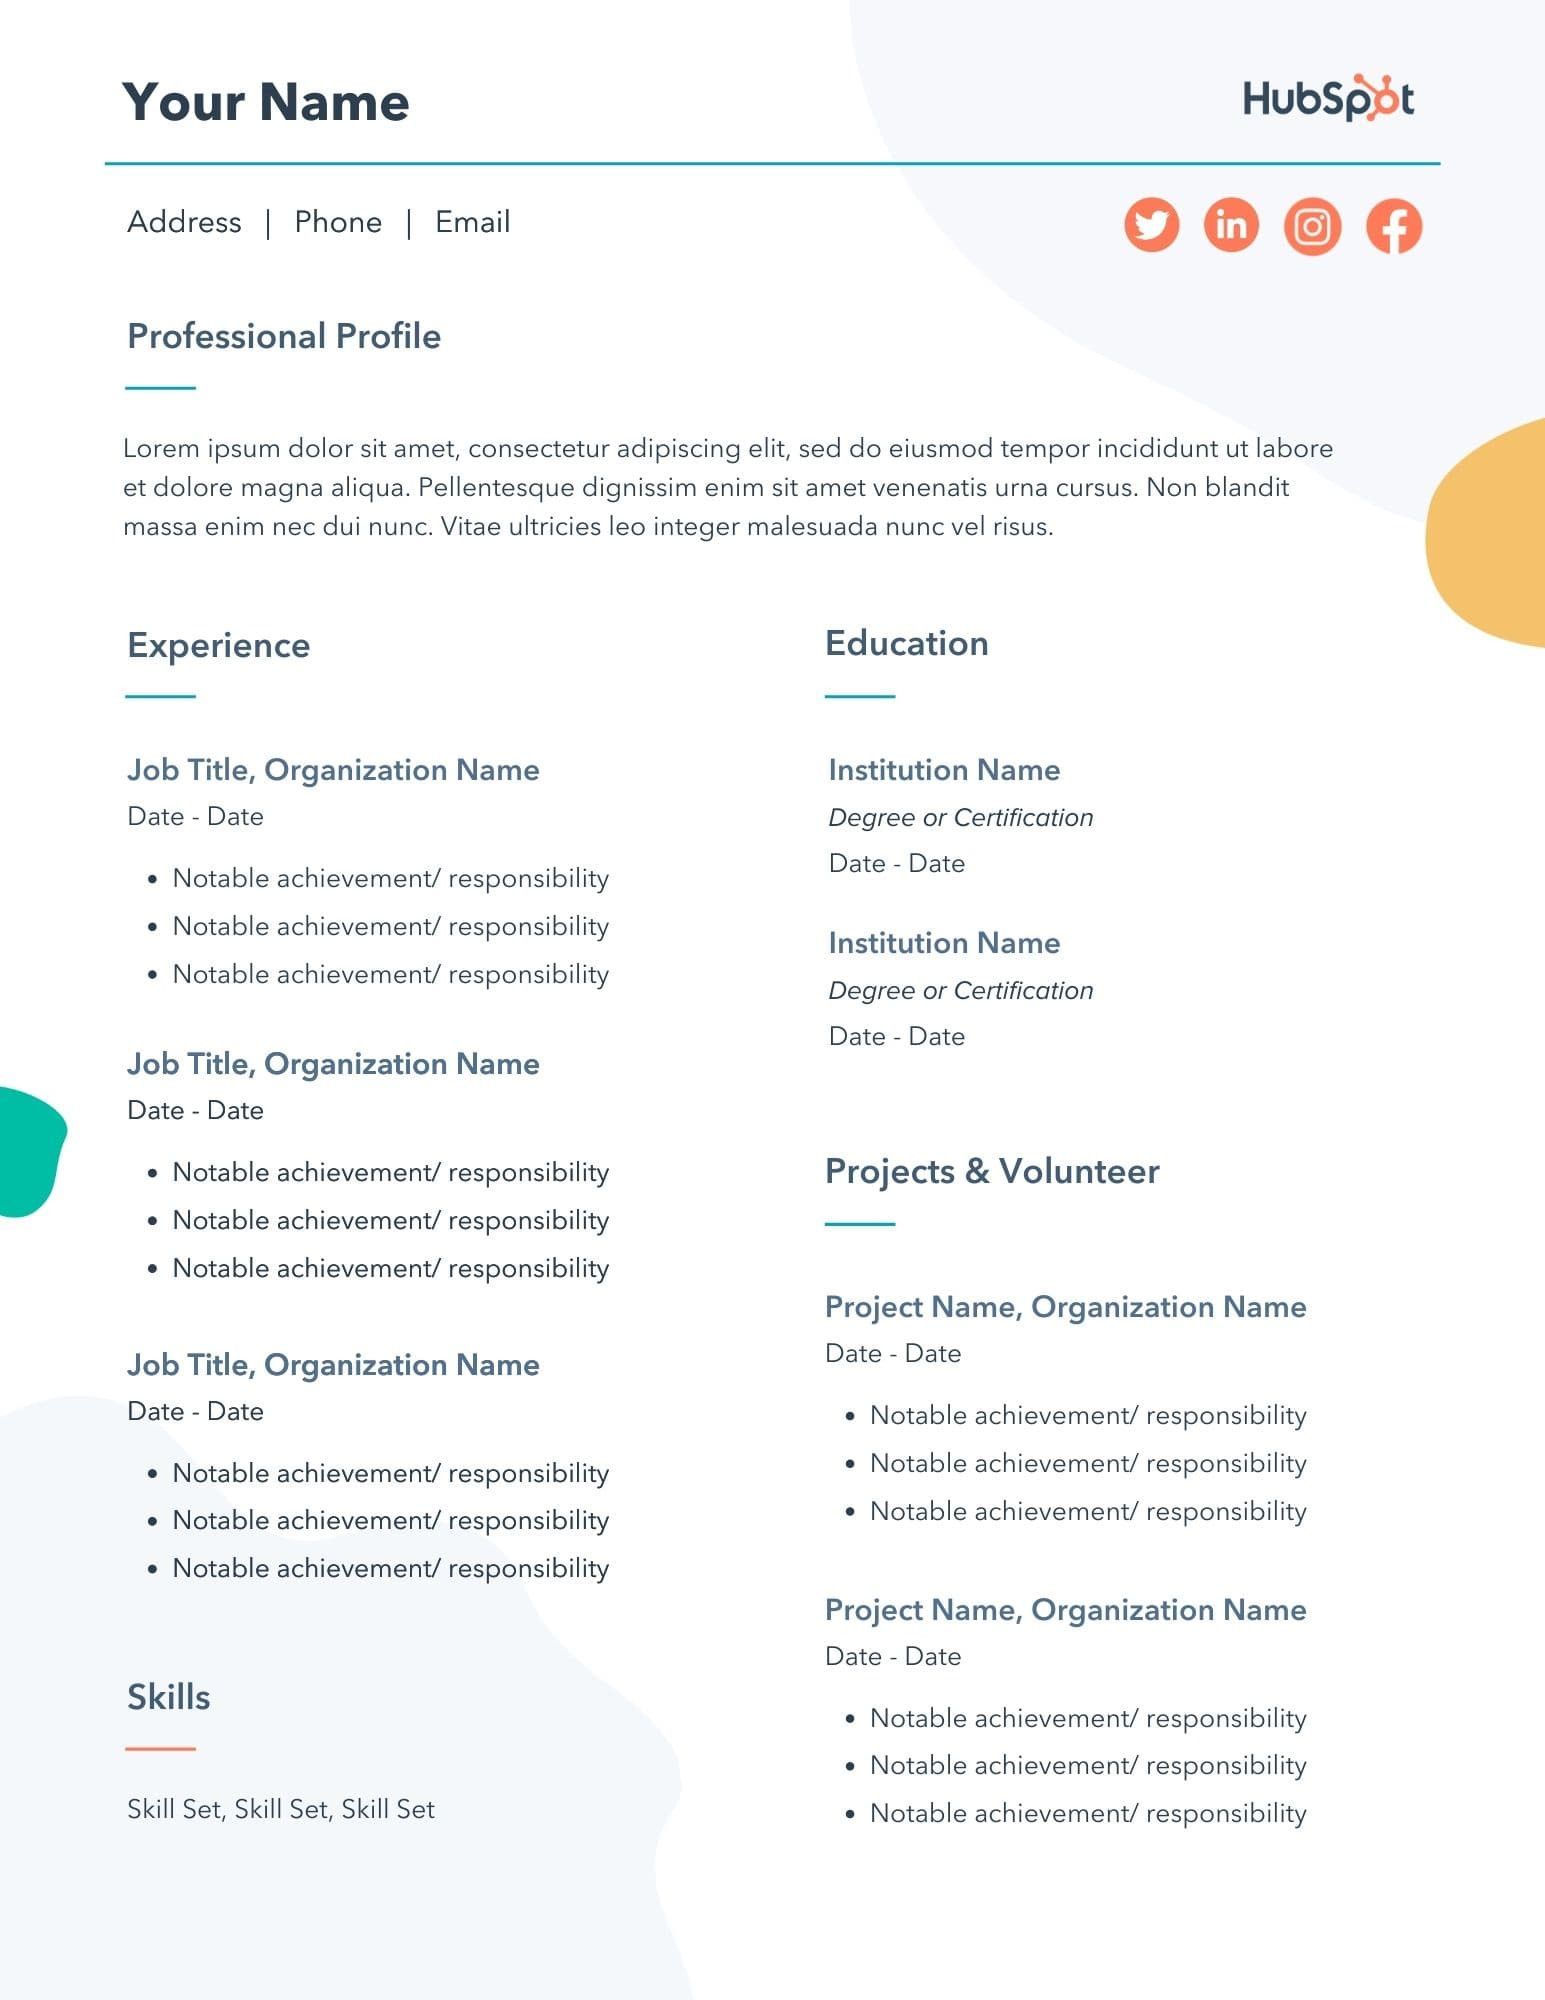 Sample Resume that Can Be Edited 29 Free Resume Templates for Microsoft Word (& How to Make Your Own)